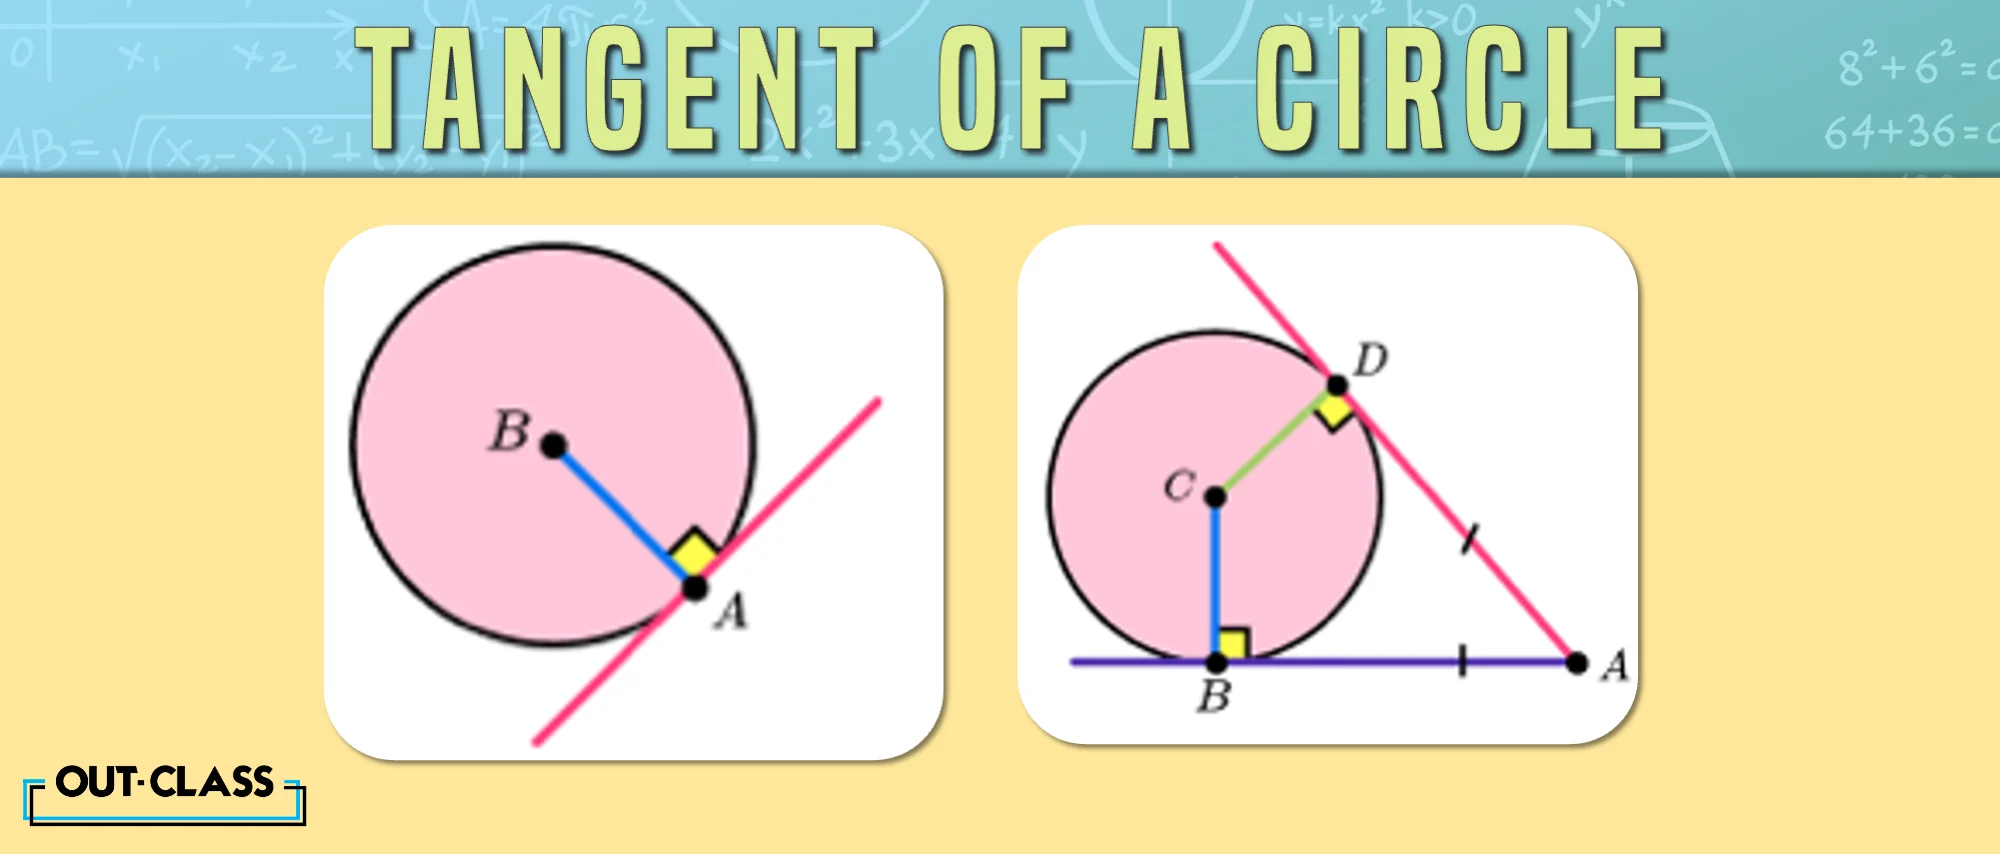 tangent of a circle is another feature of the circle properties that play a role in the angle properties.